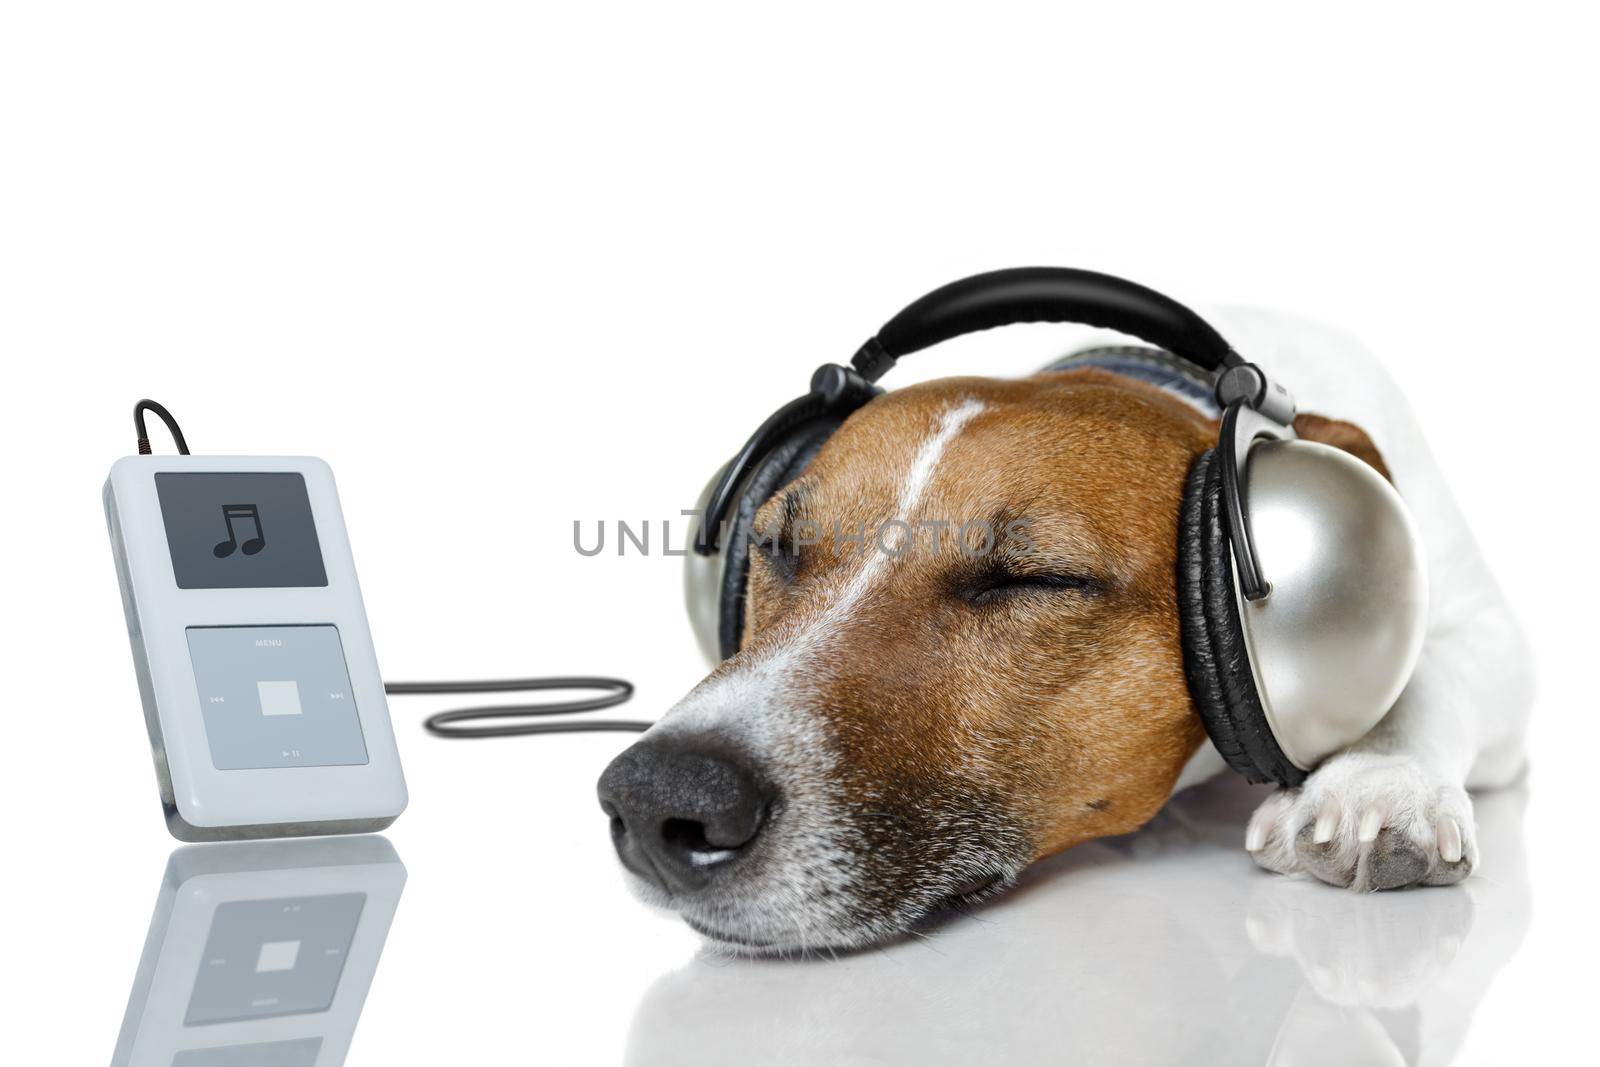 Dog listen to music with a music player by Brosch